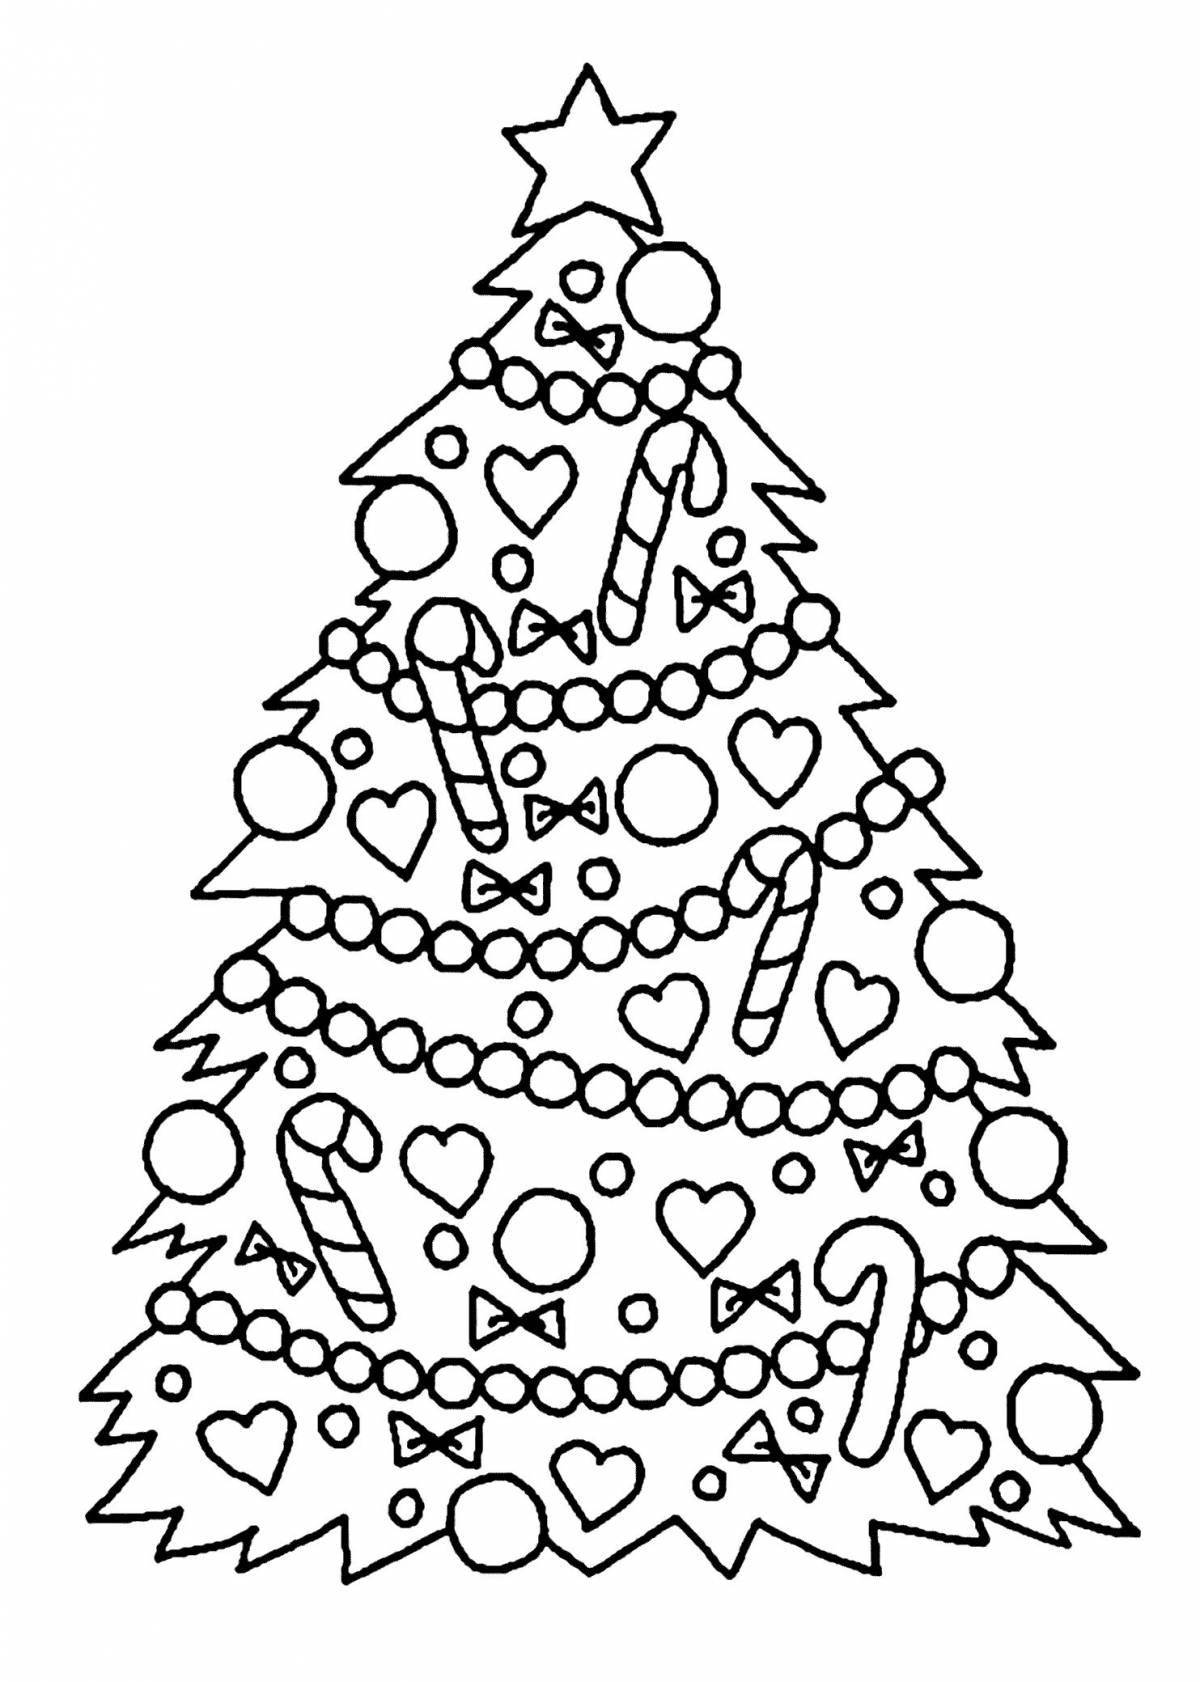 Fantastic Christmas tree coloring book for 4-5 year olds